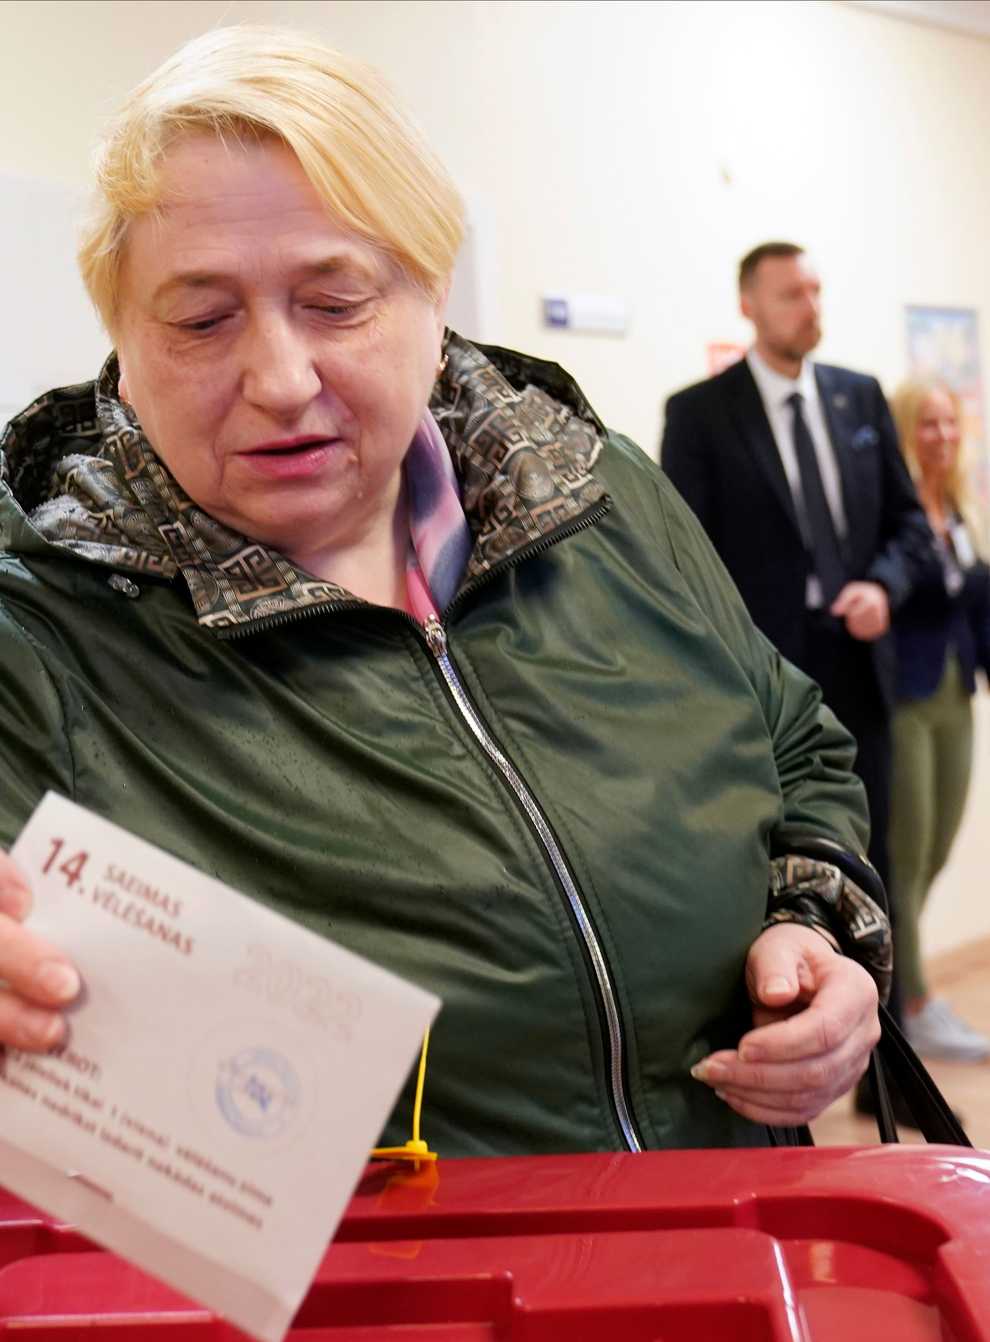 A woman casts her ballot at a polling station during general elections in Riga (AP)